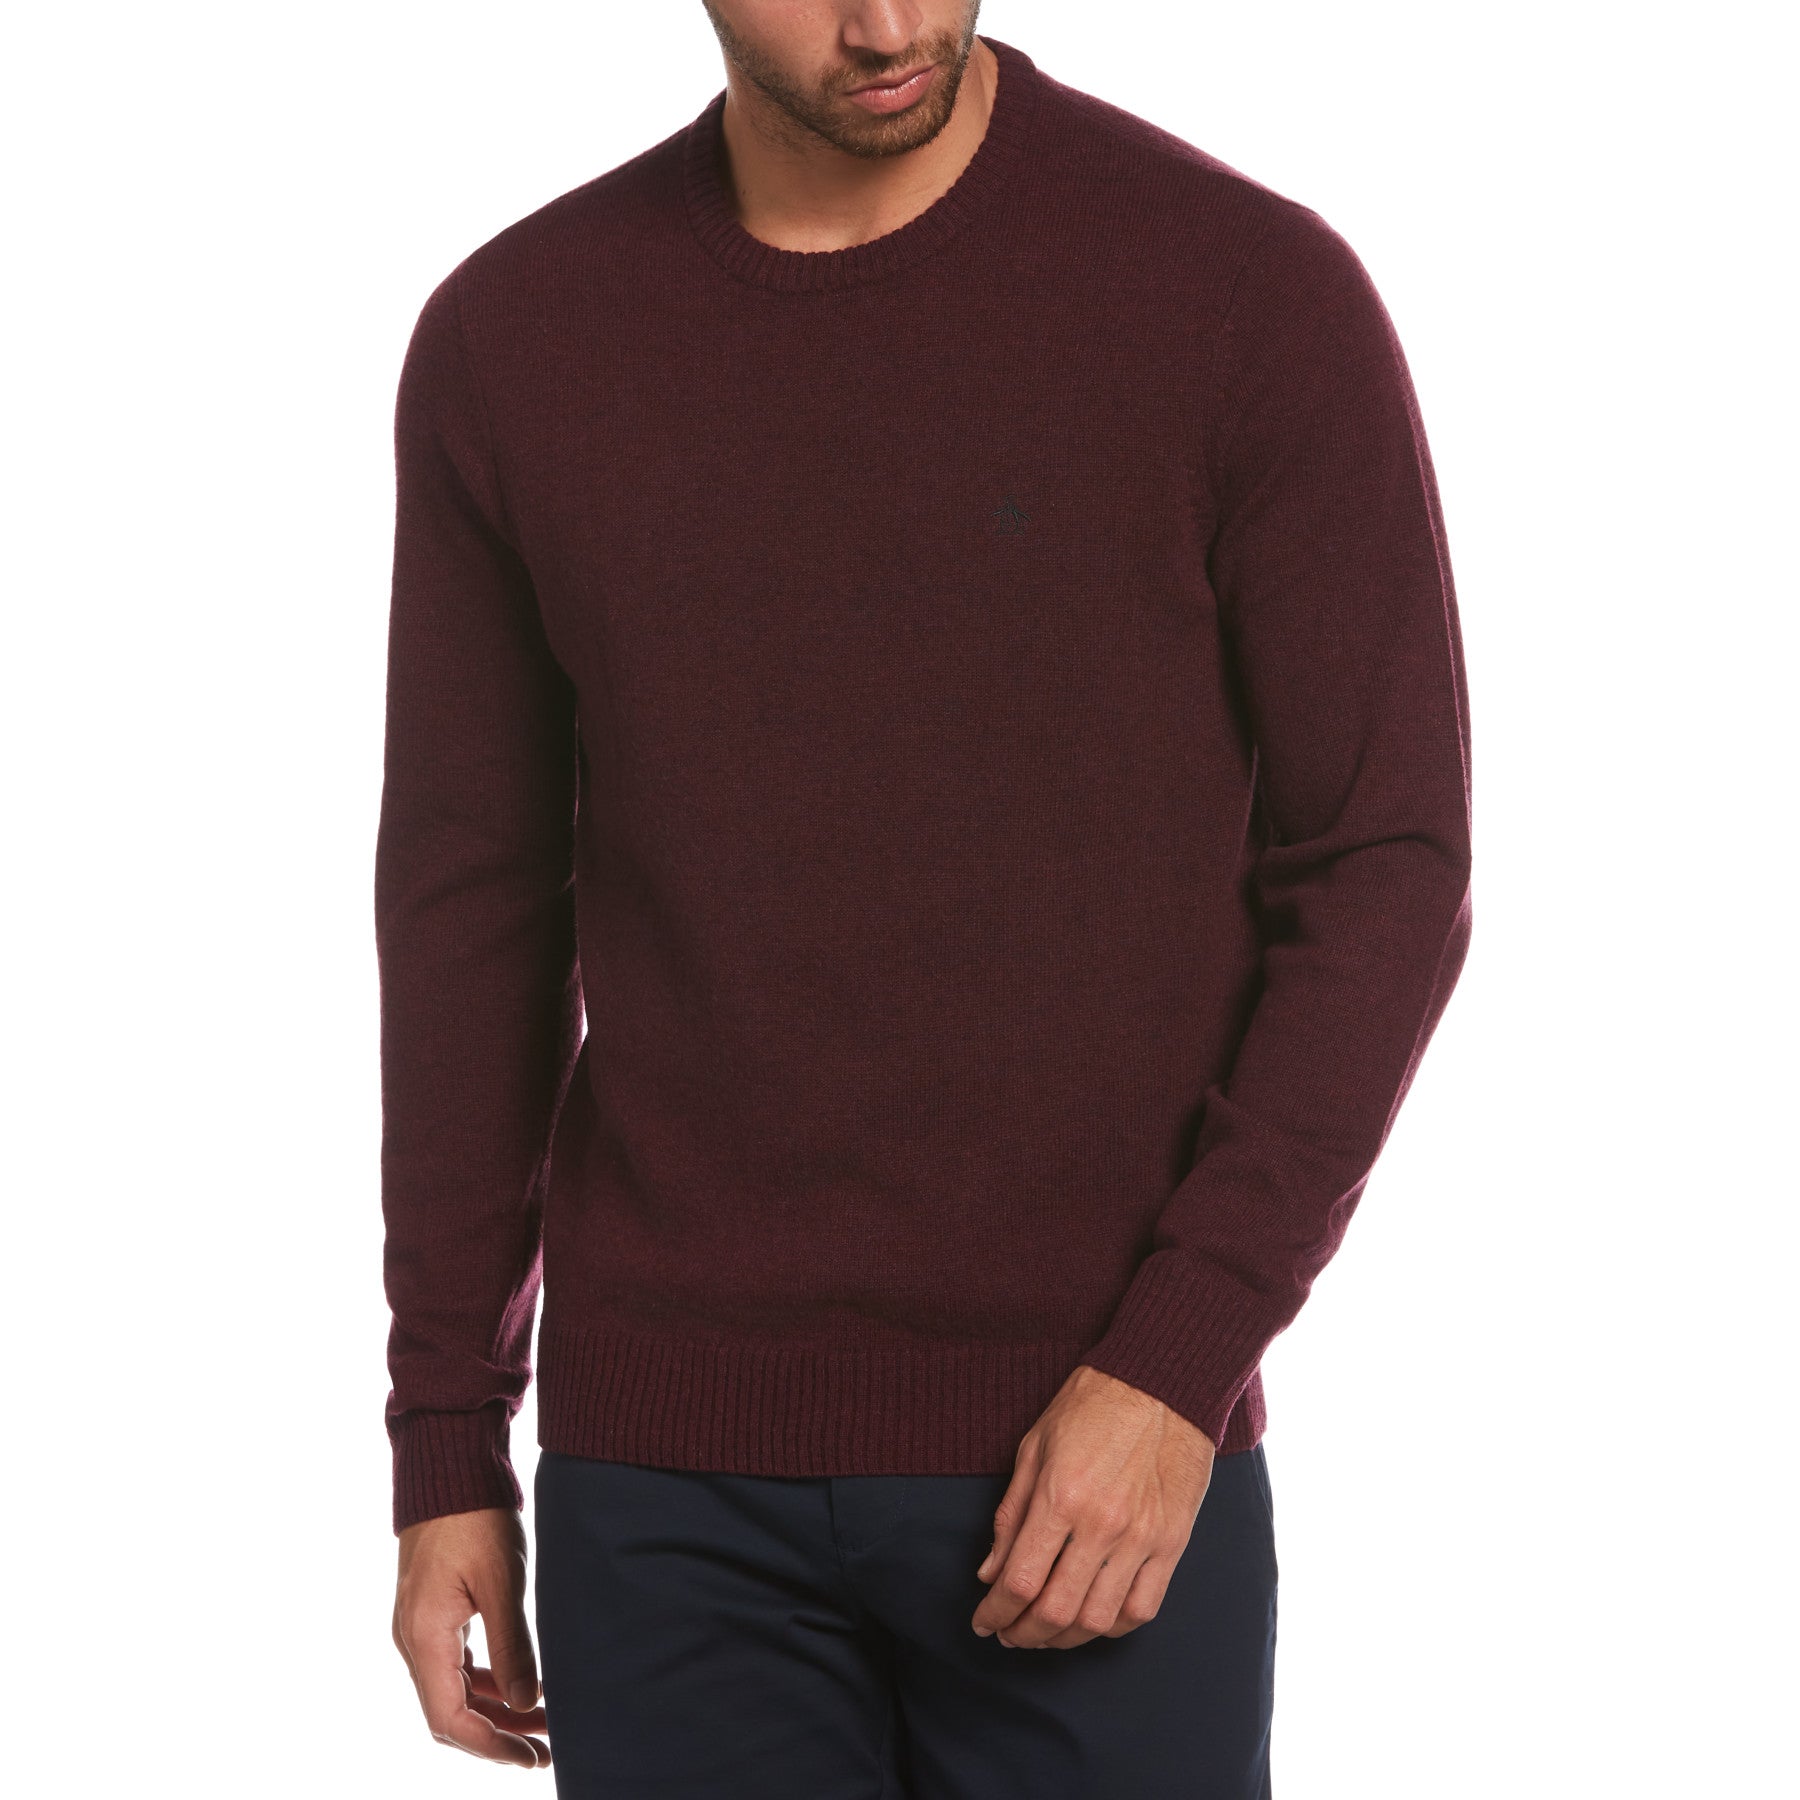 View Lambswool Crew Neck Jumper In Tawny Port information